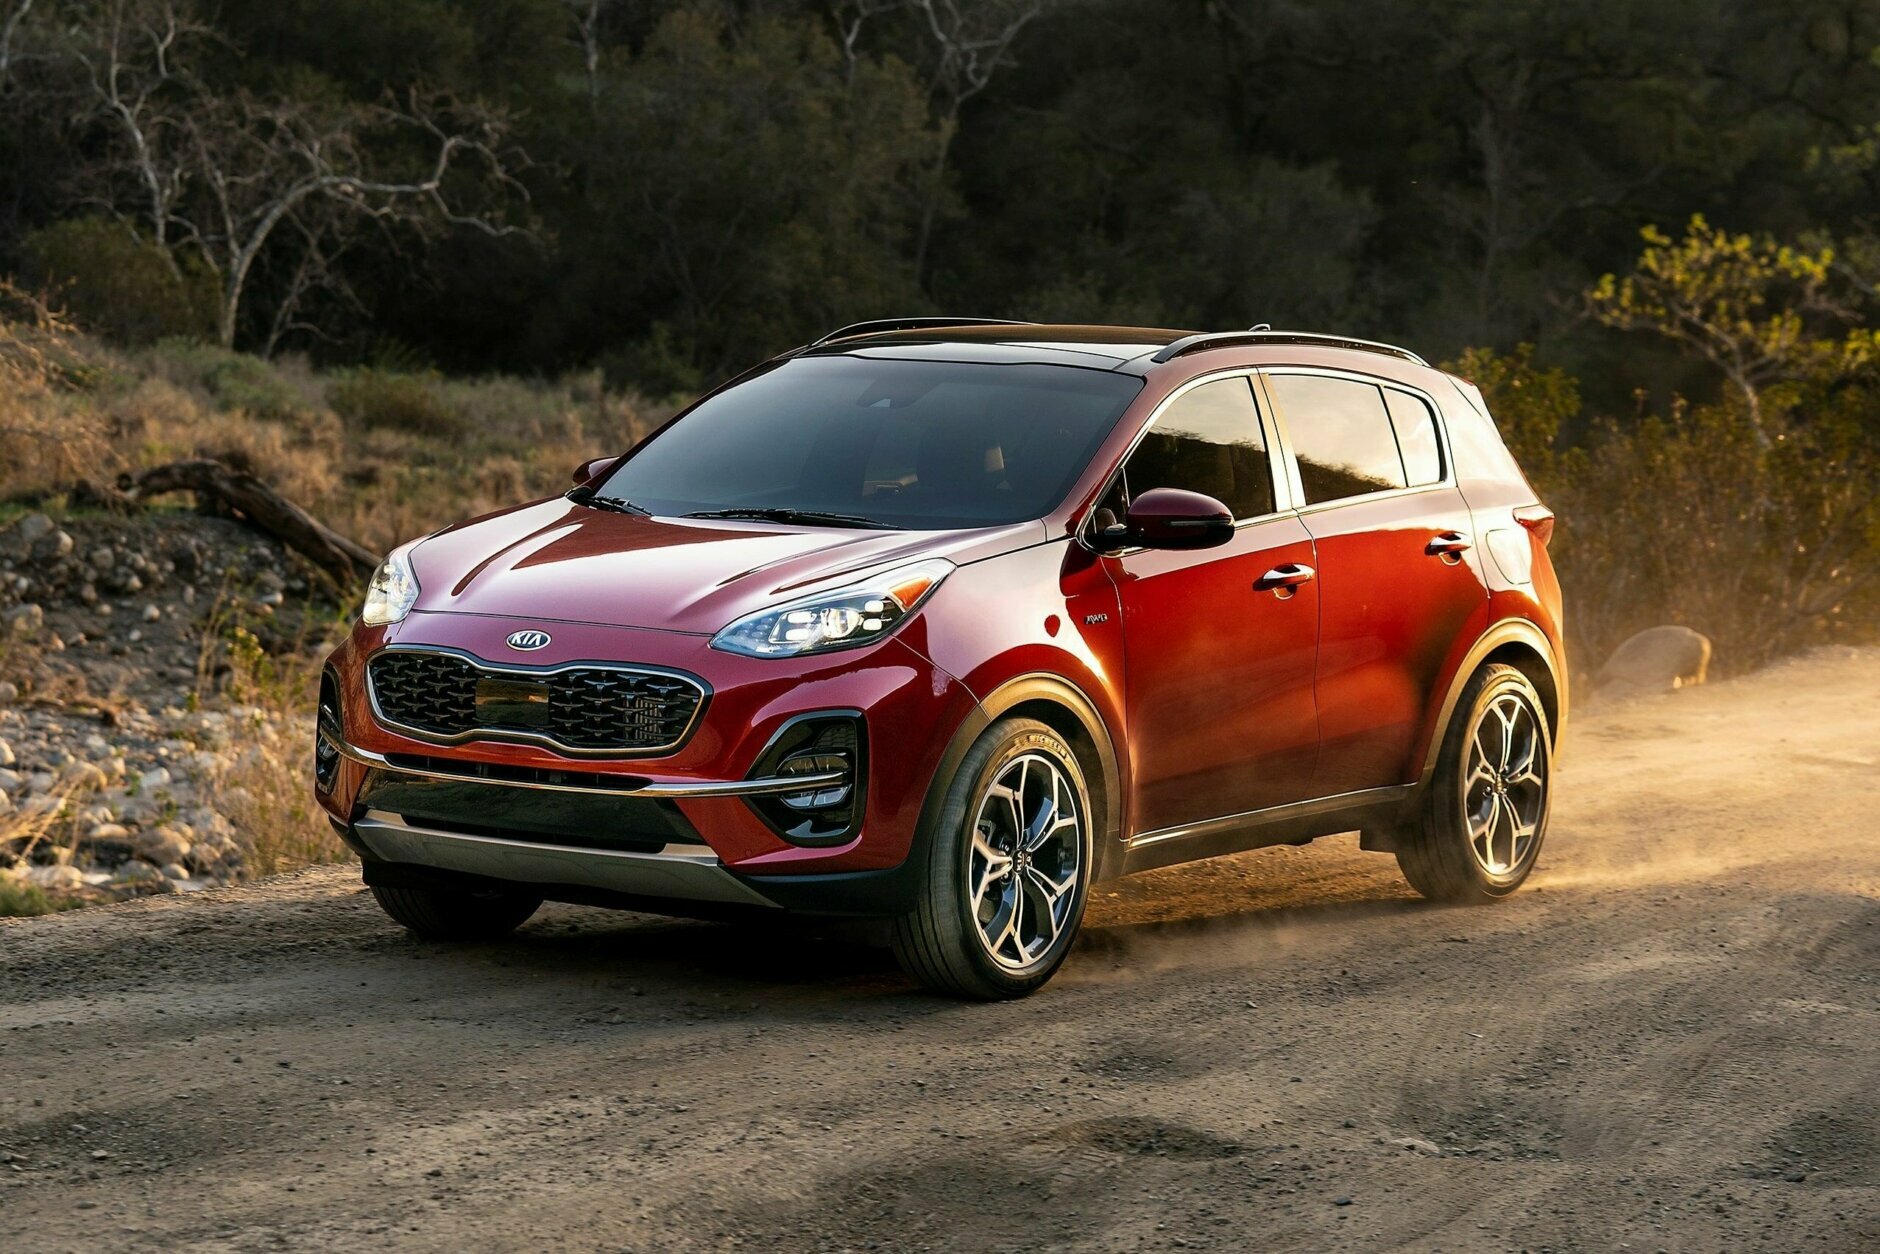 <p><strong>Best new SUV for teens, $25,000 to $30,000:</strong> The Kia Sportage</p>
<p>The Kia Sportage has “excellent crash test scores, lots of good safety features,” she said. Like the Optima, the Sportage has an app to let parents know where their teen is driving. ”The other thing that&#8217;s kind of nice about it, too, is, it will mark where the car is parked.”</p>
